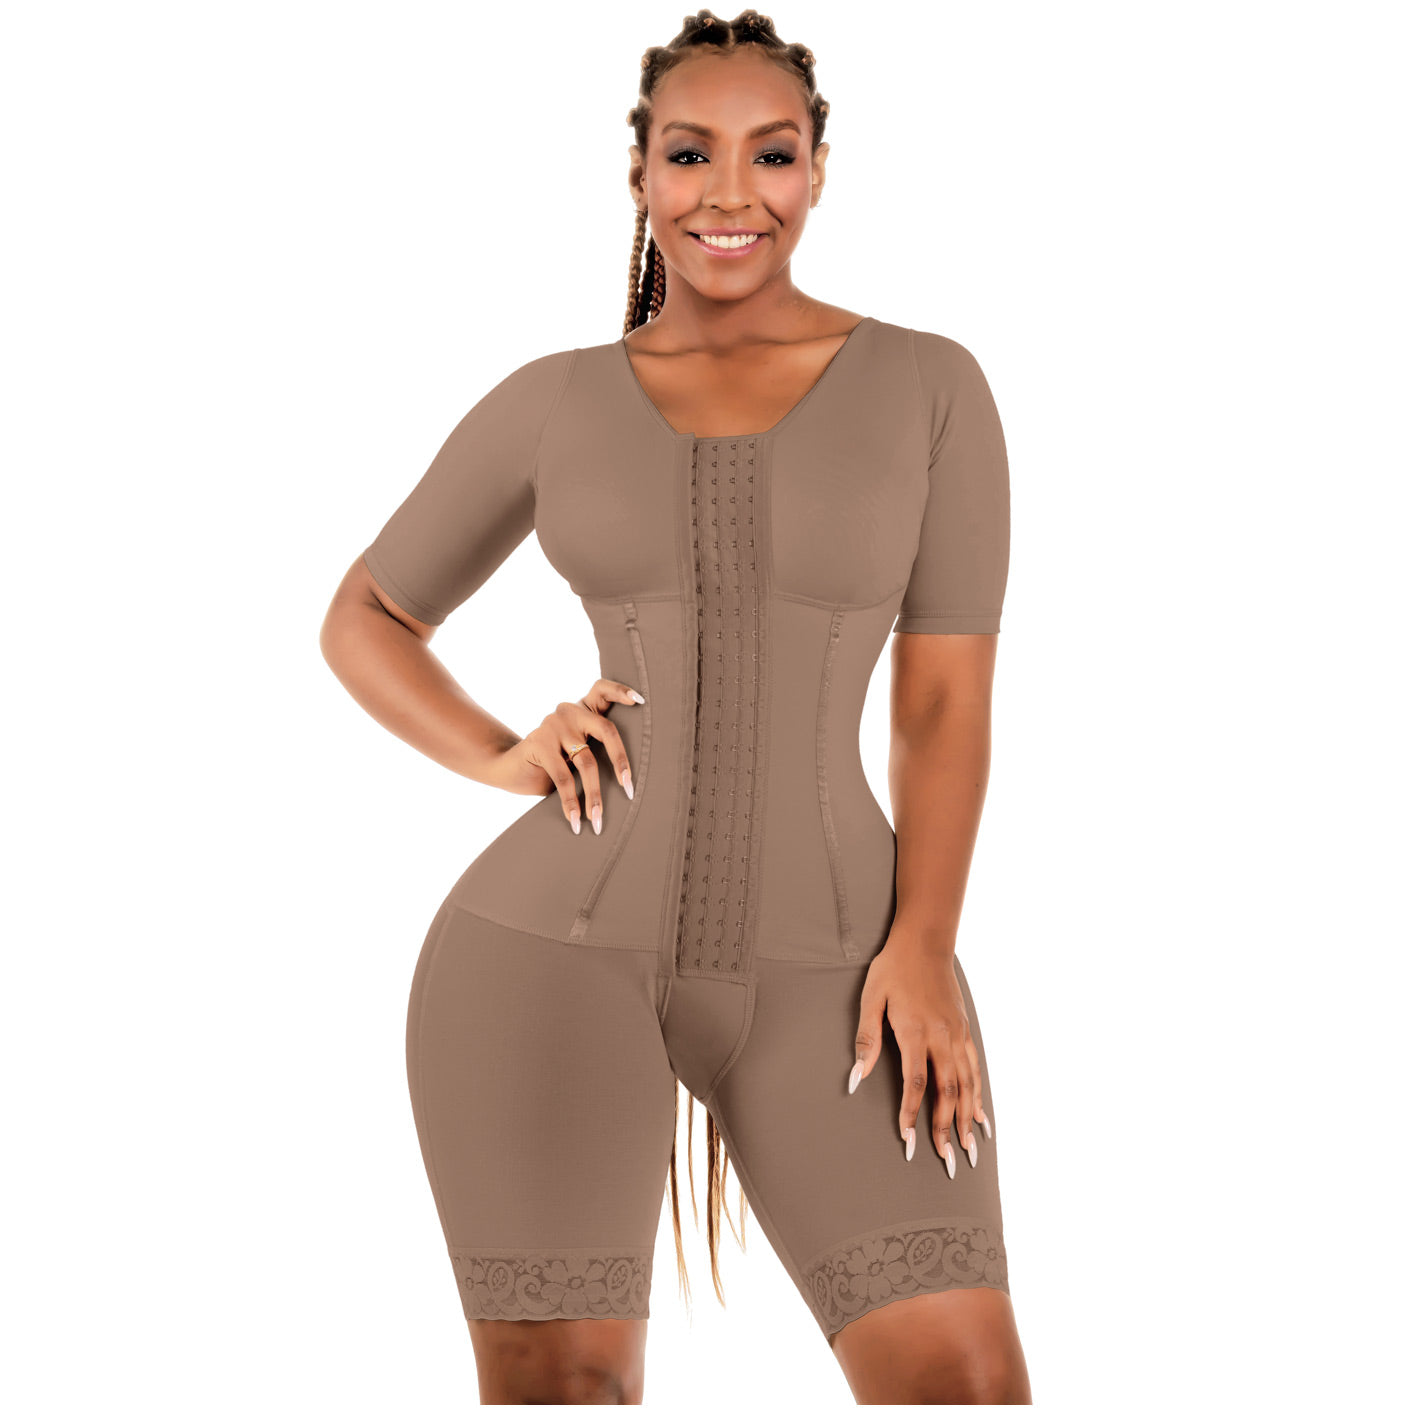 Bling Shapers 938BF | Colombian Compression Garment for Women | Enhance Your Figure with Sleeves and Built-In Bra | Experience the Power of Powernet